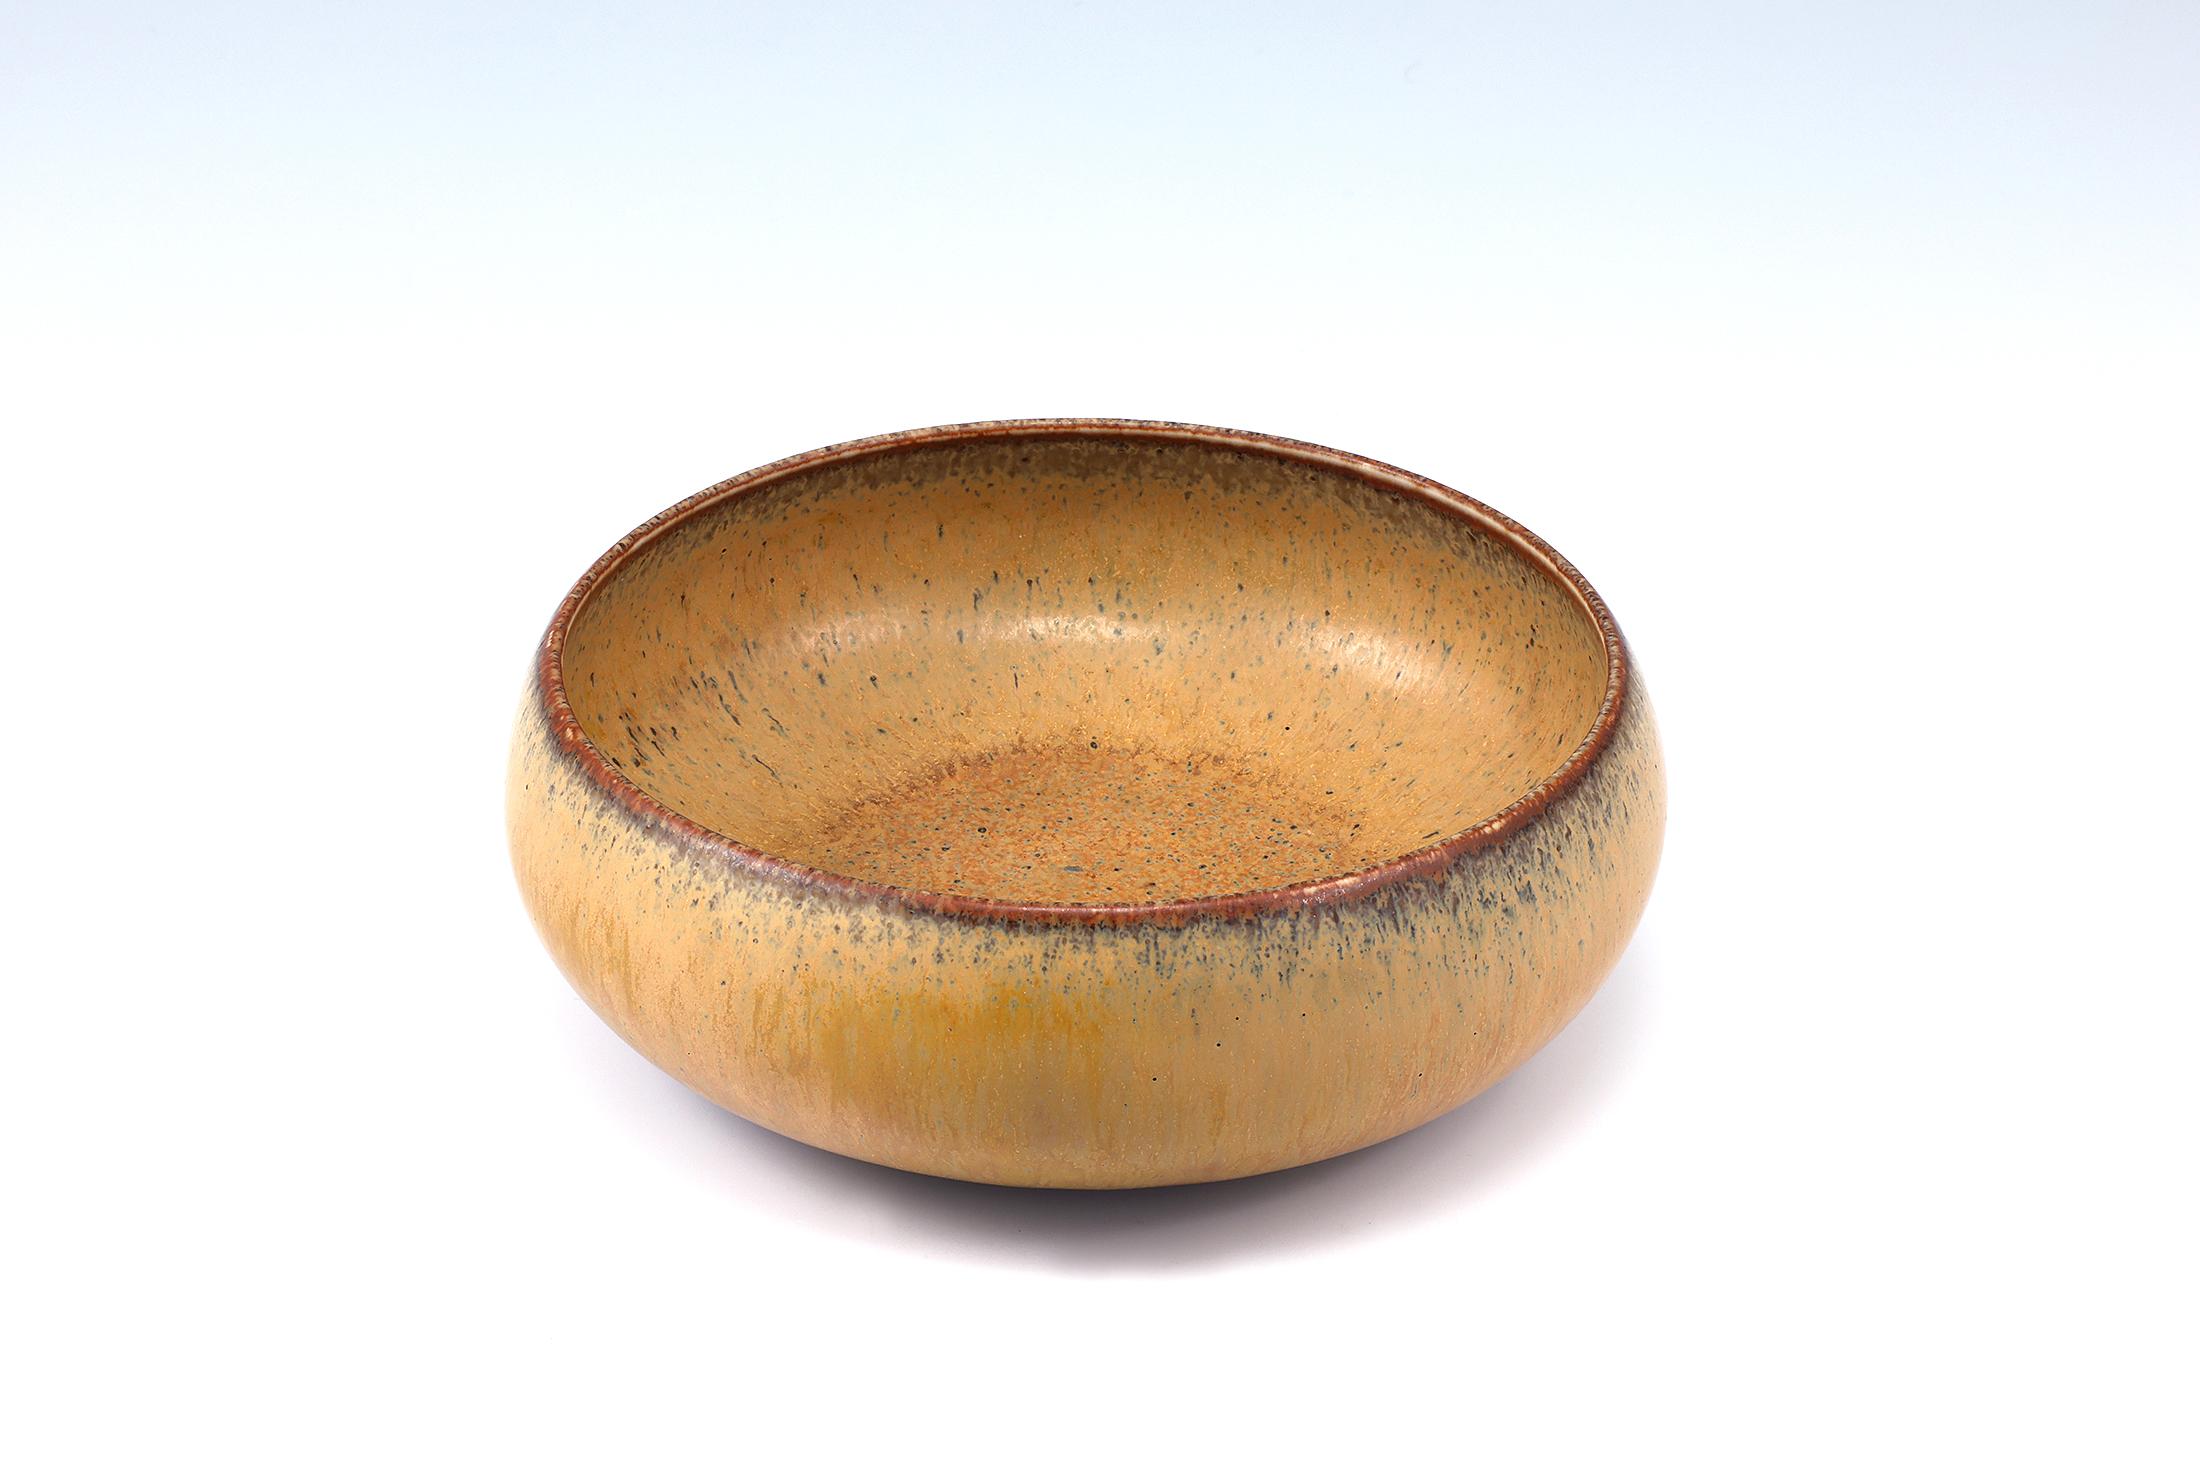 Carl-Harry Stålhane, Stoneware Bowl with yellow brown glaze, Rörstrand, Sweden 1950's Impressed Handmade
Rörstrand R three crowns Stalhane SWEDEN CI25

The entire piece is covered with a Red brown glaze, over which a double layer of ochre-colored